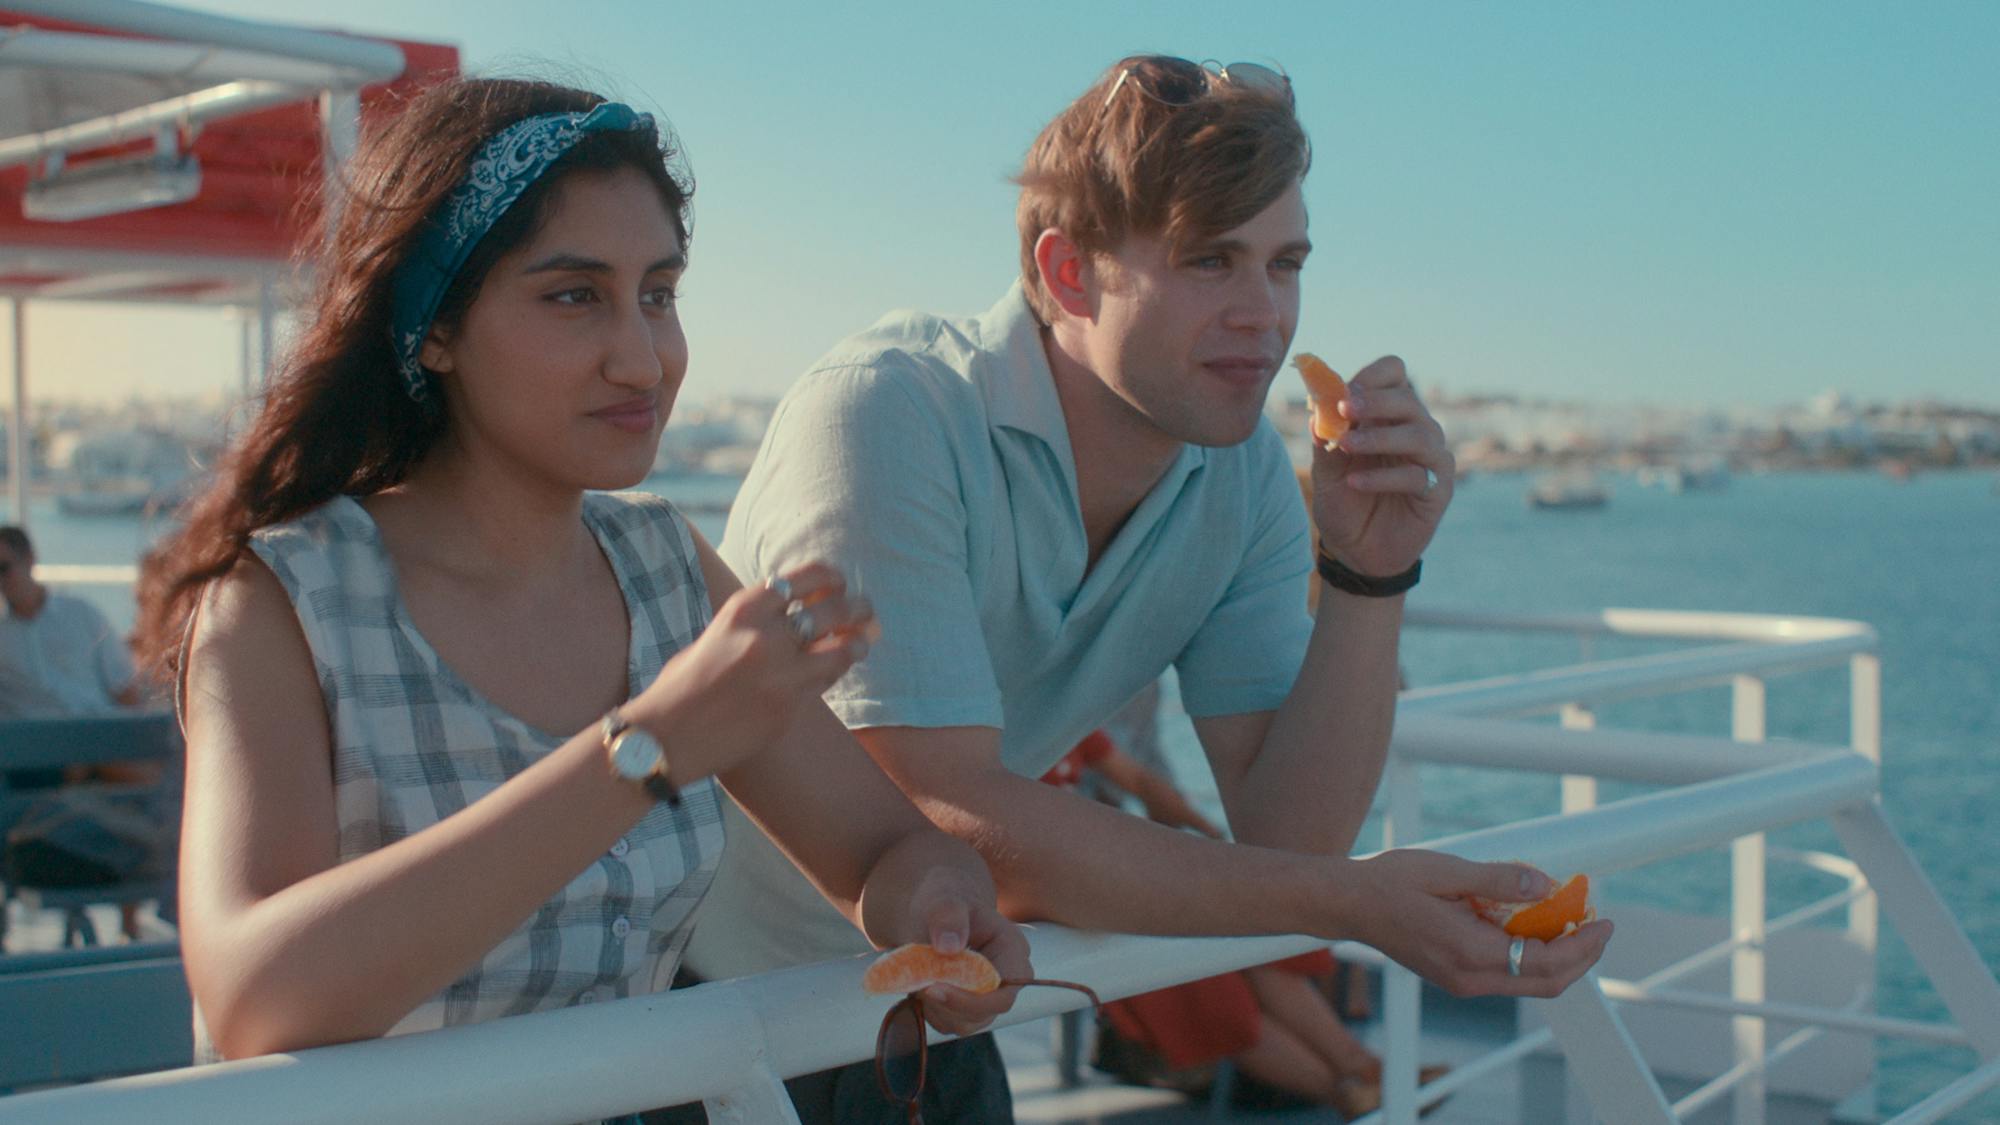 Emma Morley (Ambika Mod) and Dexter Mayhew (Leo Woodall) share an orange and they lean off the edge of a boat, enjoying the view.